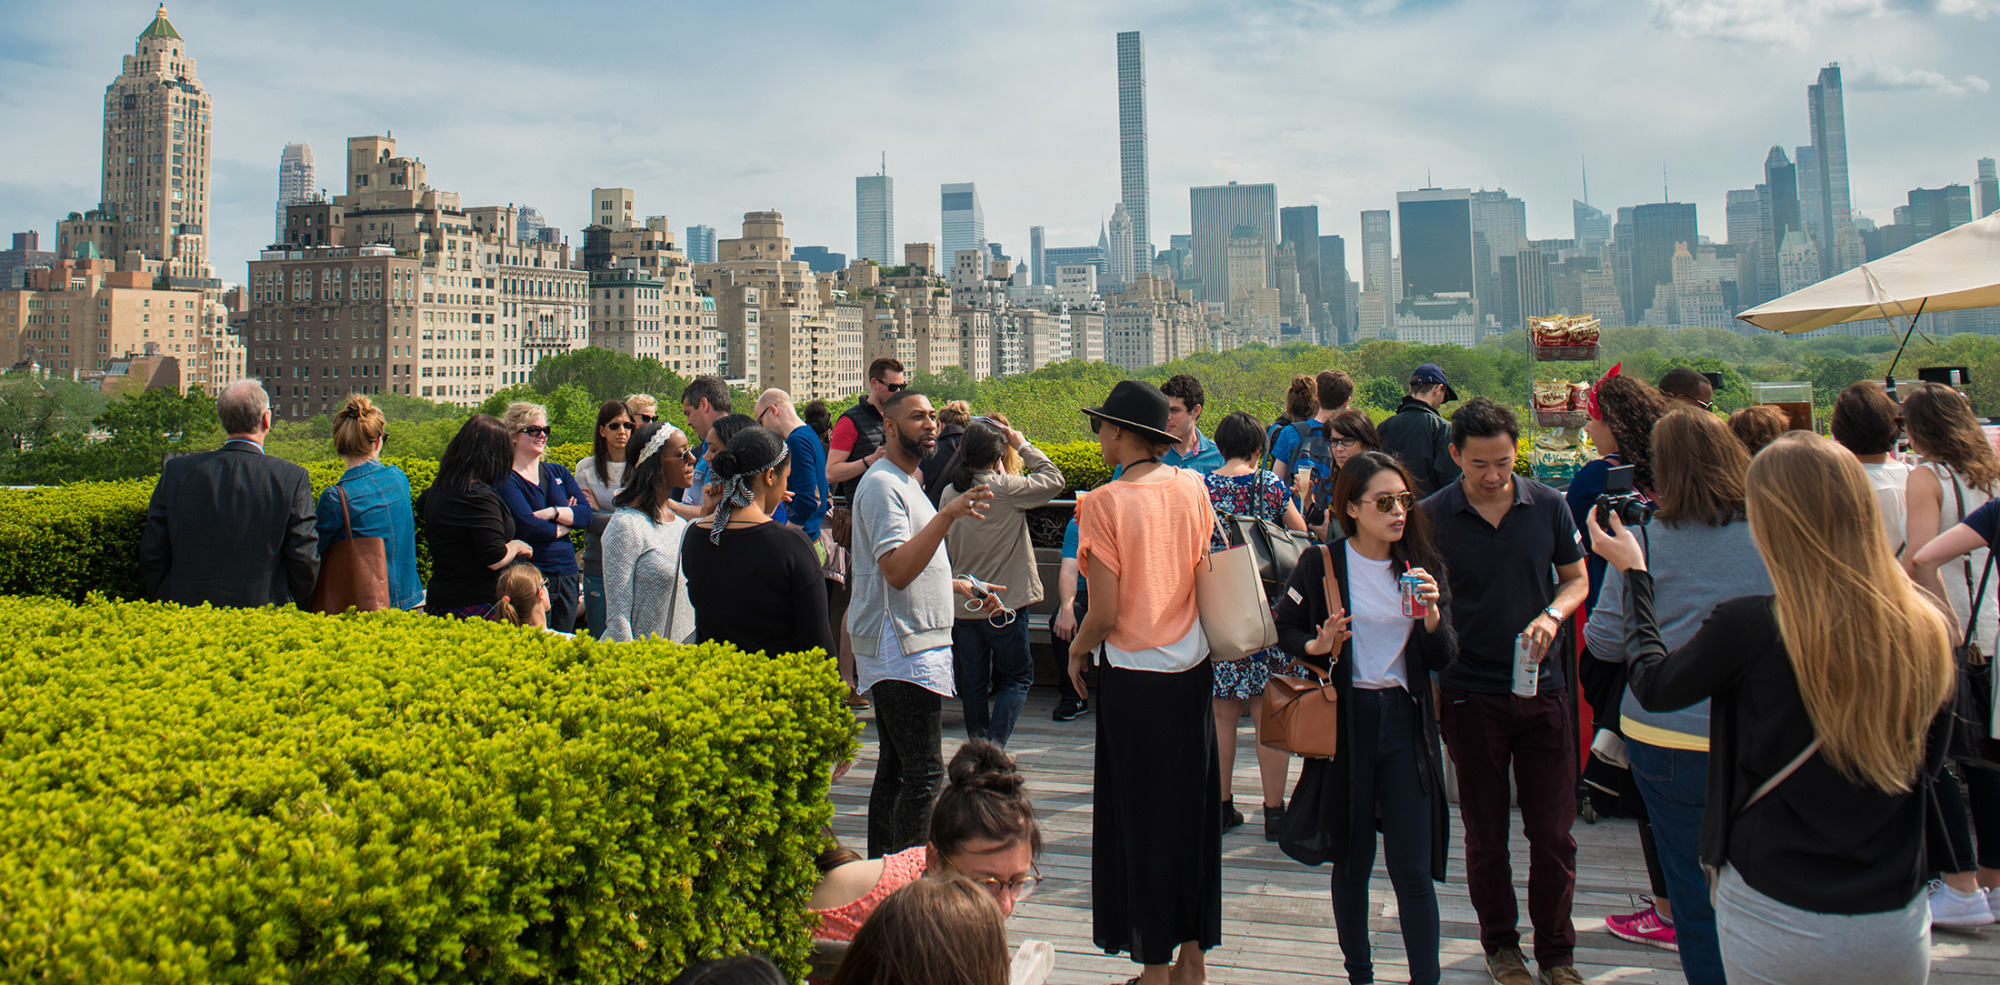 People chilling on rooftop with Manhattan and Central Park view